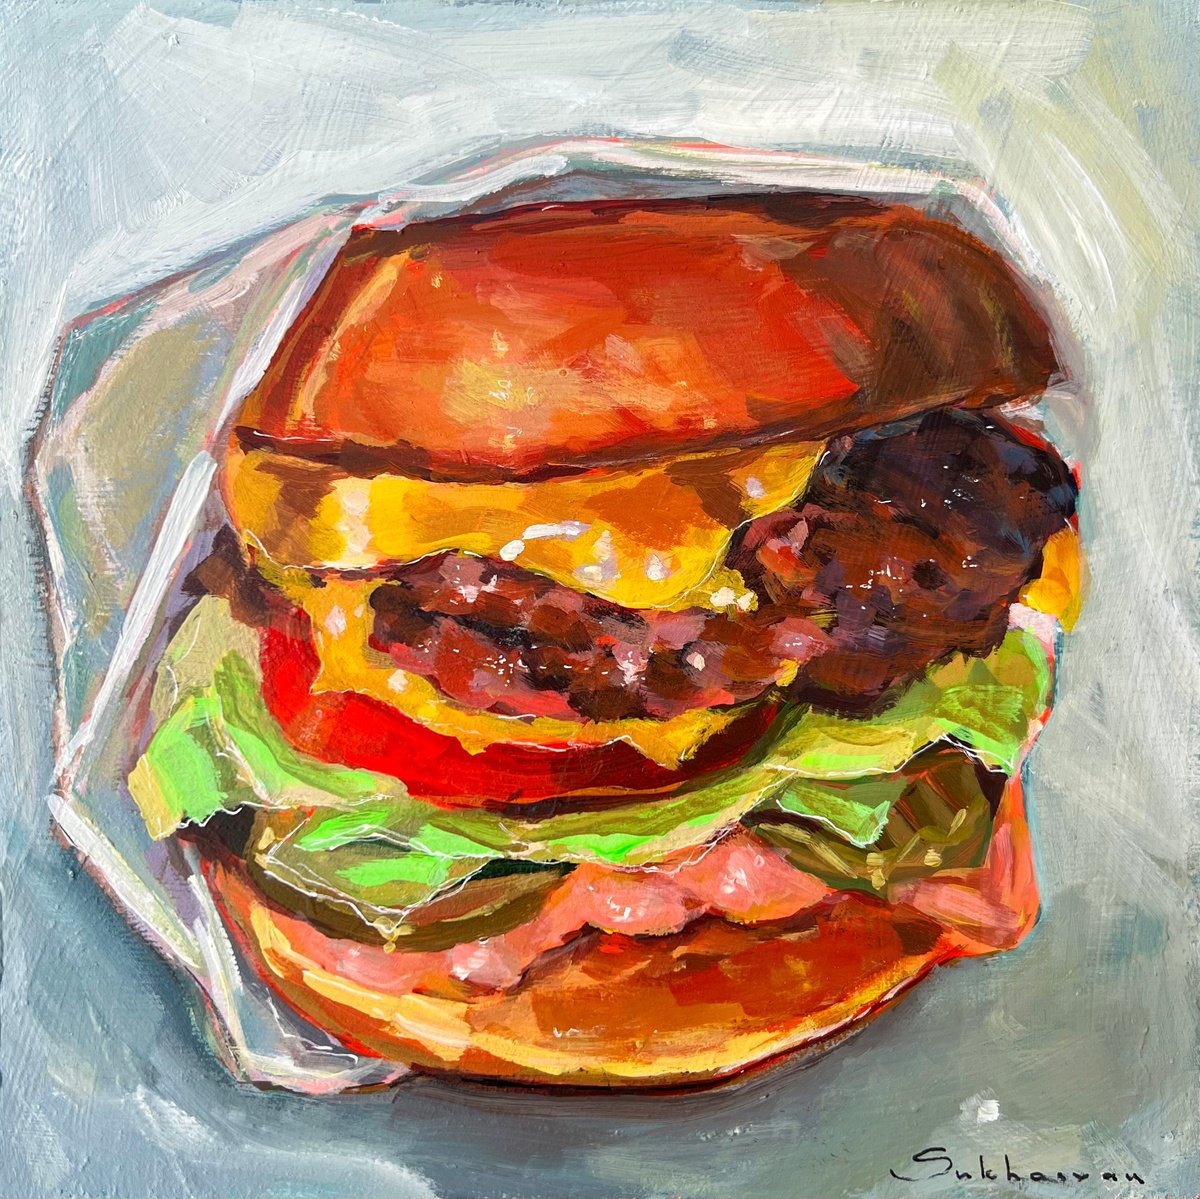 Still Life with In-N-Out Burger by Victoria Sukhasyan